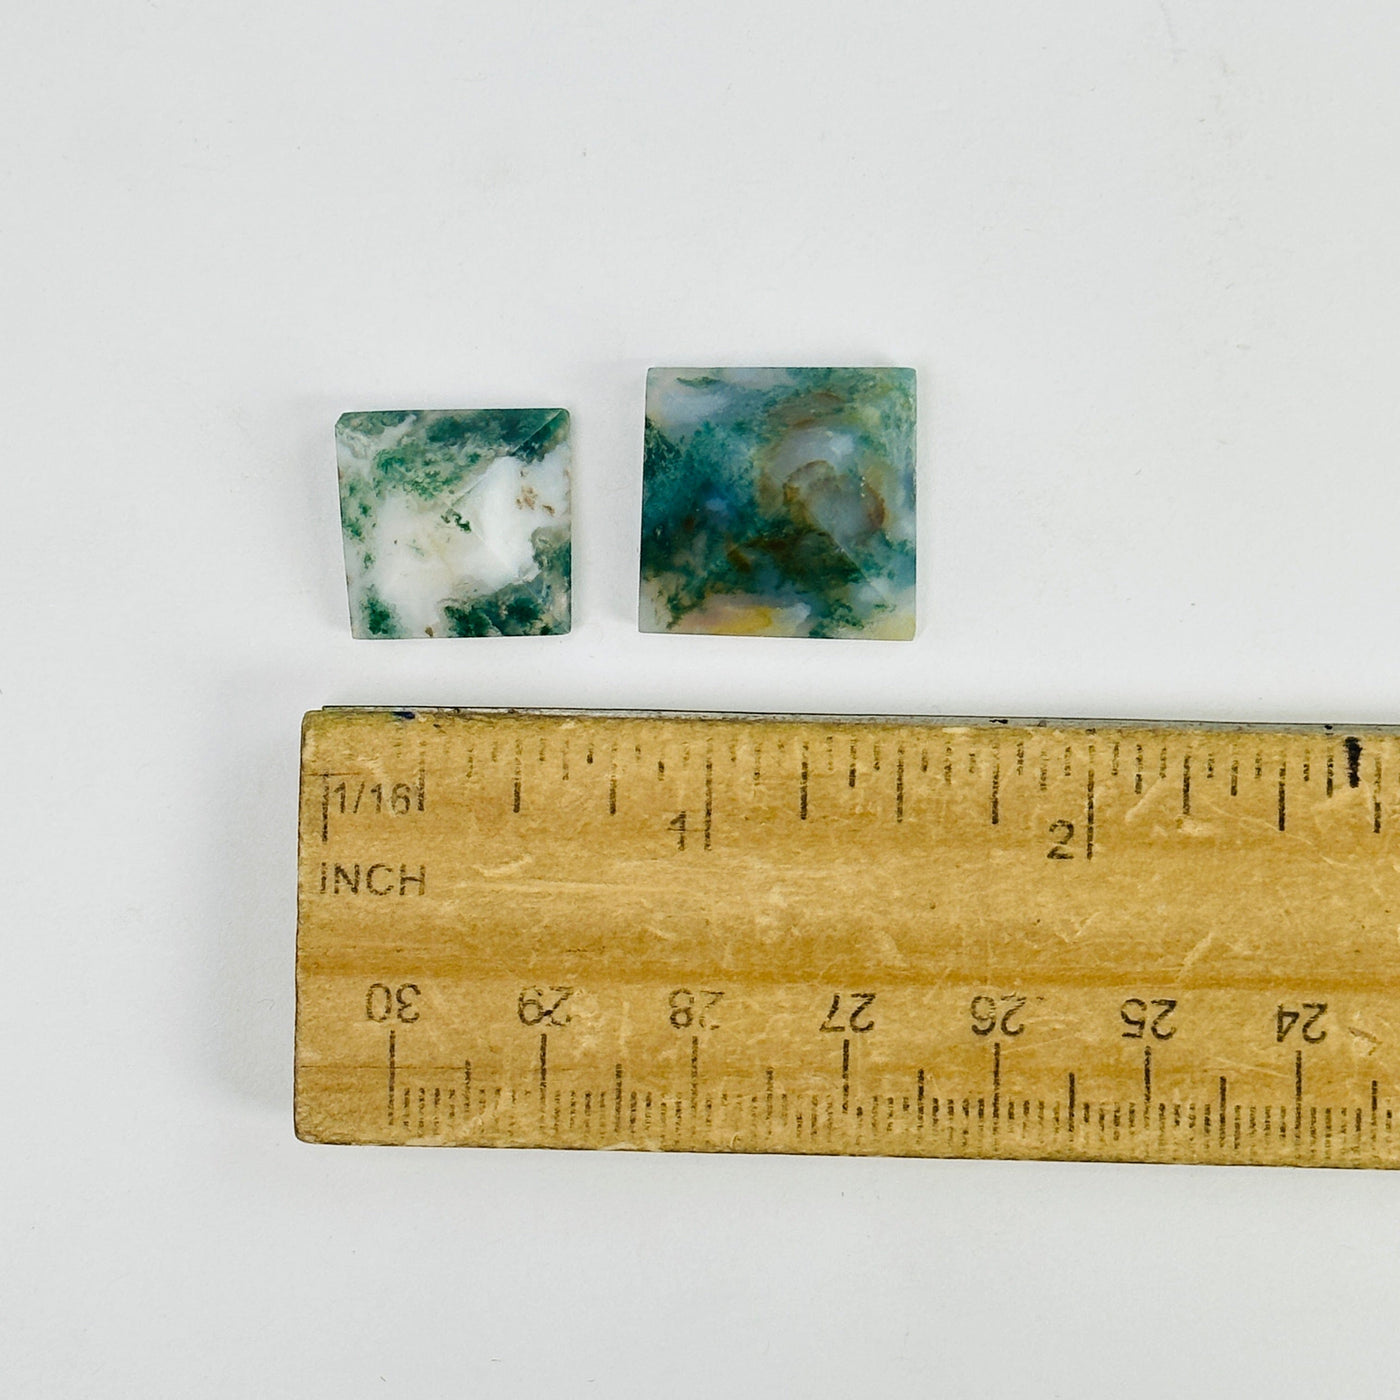 moss agate pyramids next to a ruler for size reference